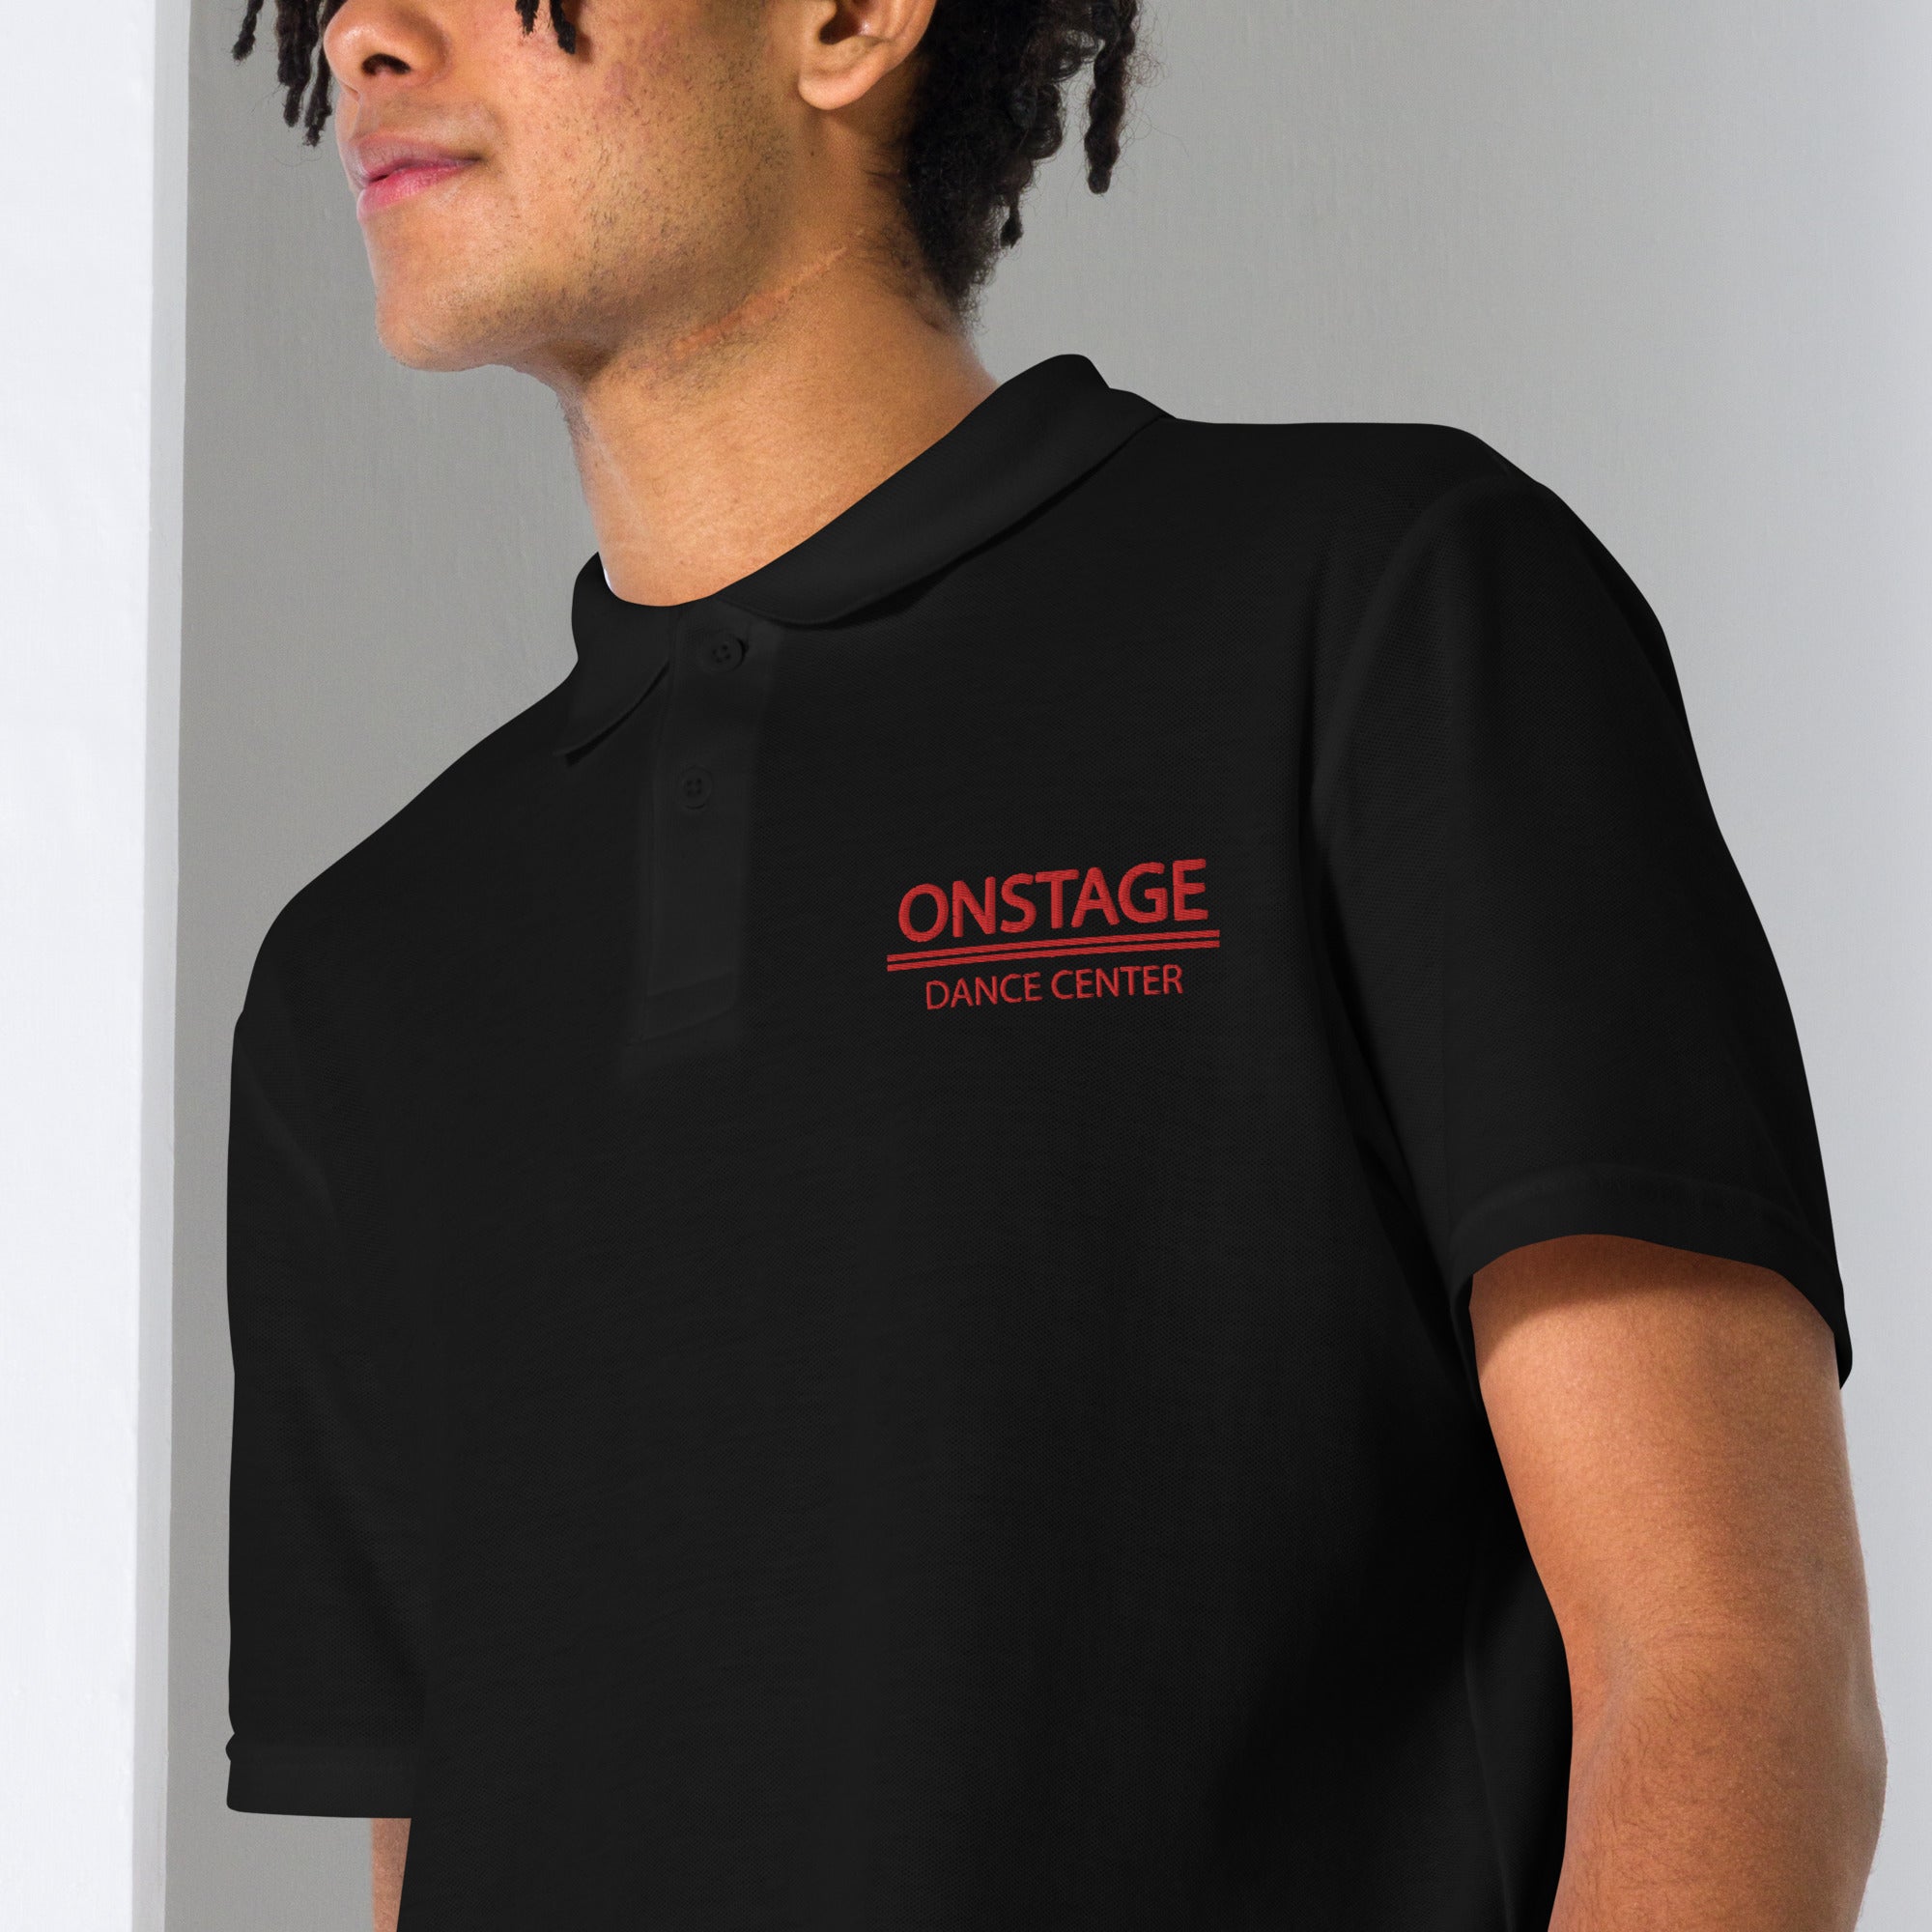 ONSTAGE Embroidered Adult Unisex Polo